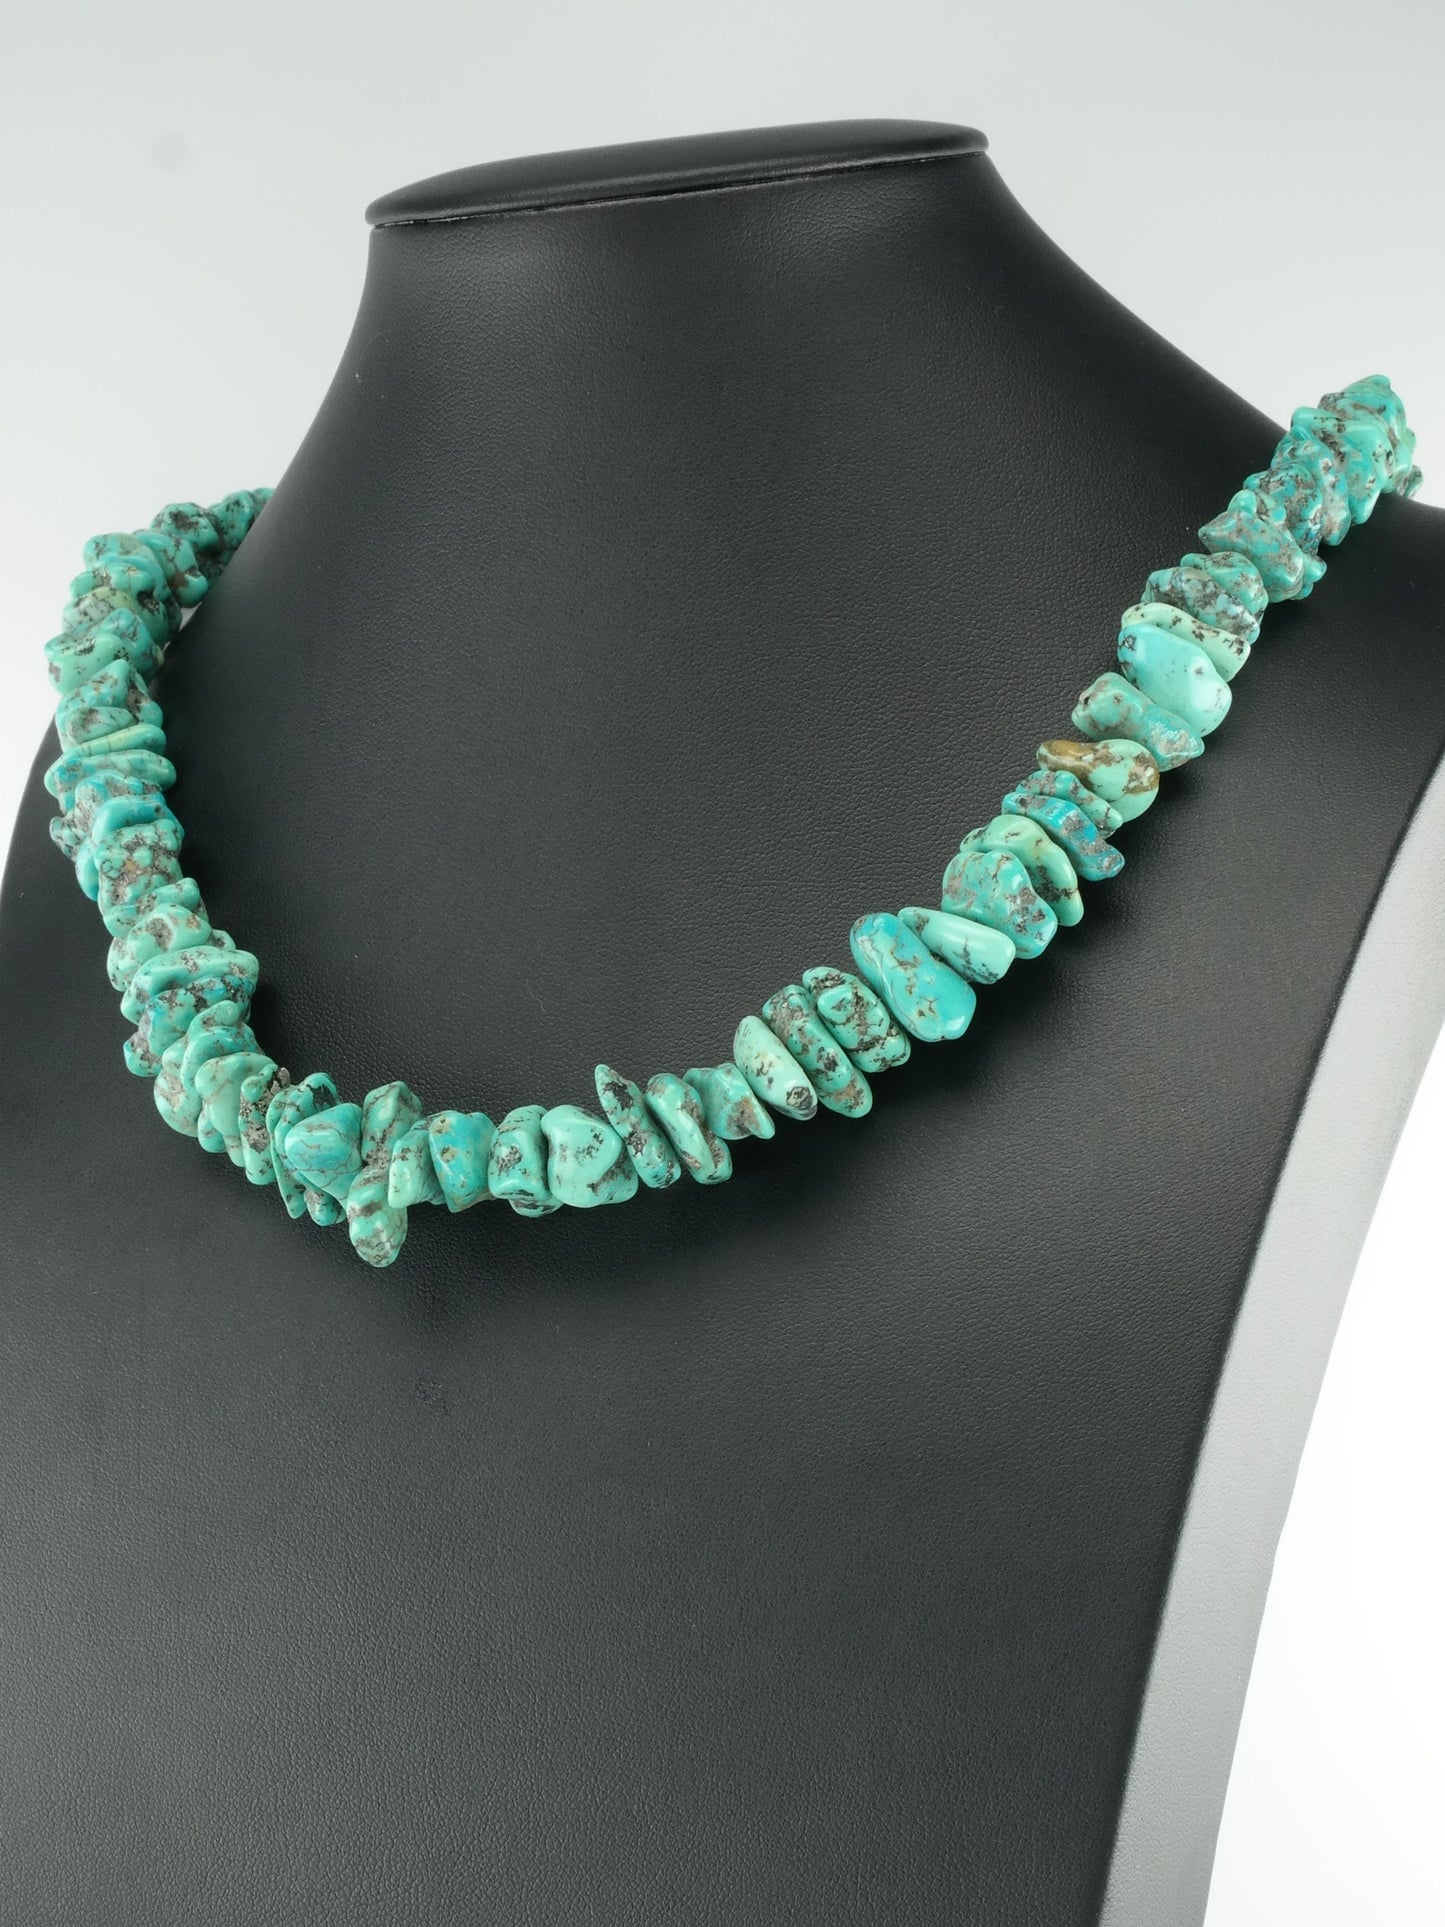 500ct Kingman Turquoise Nugget Necklace Sterling Silver